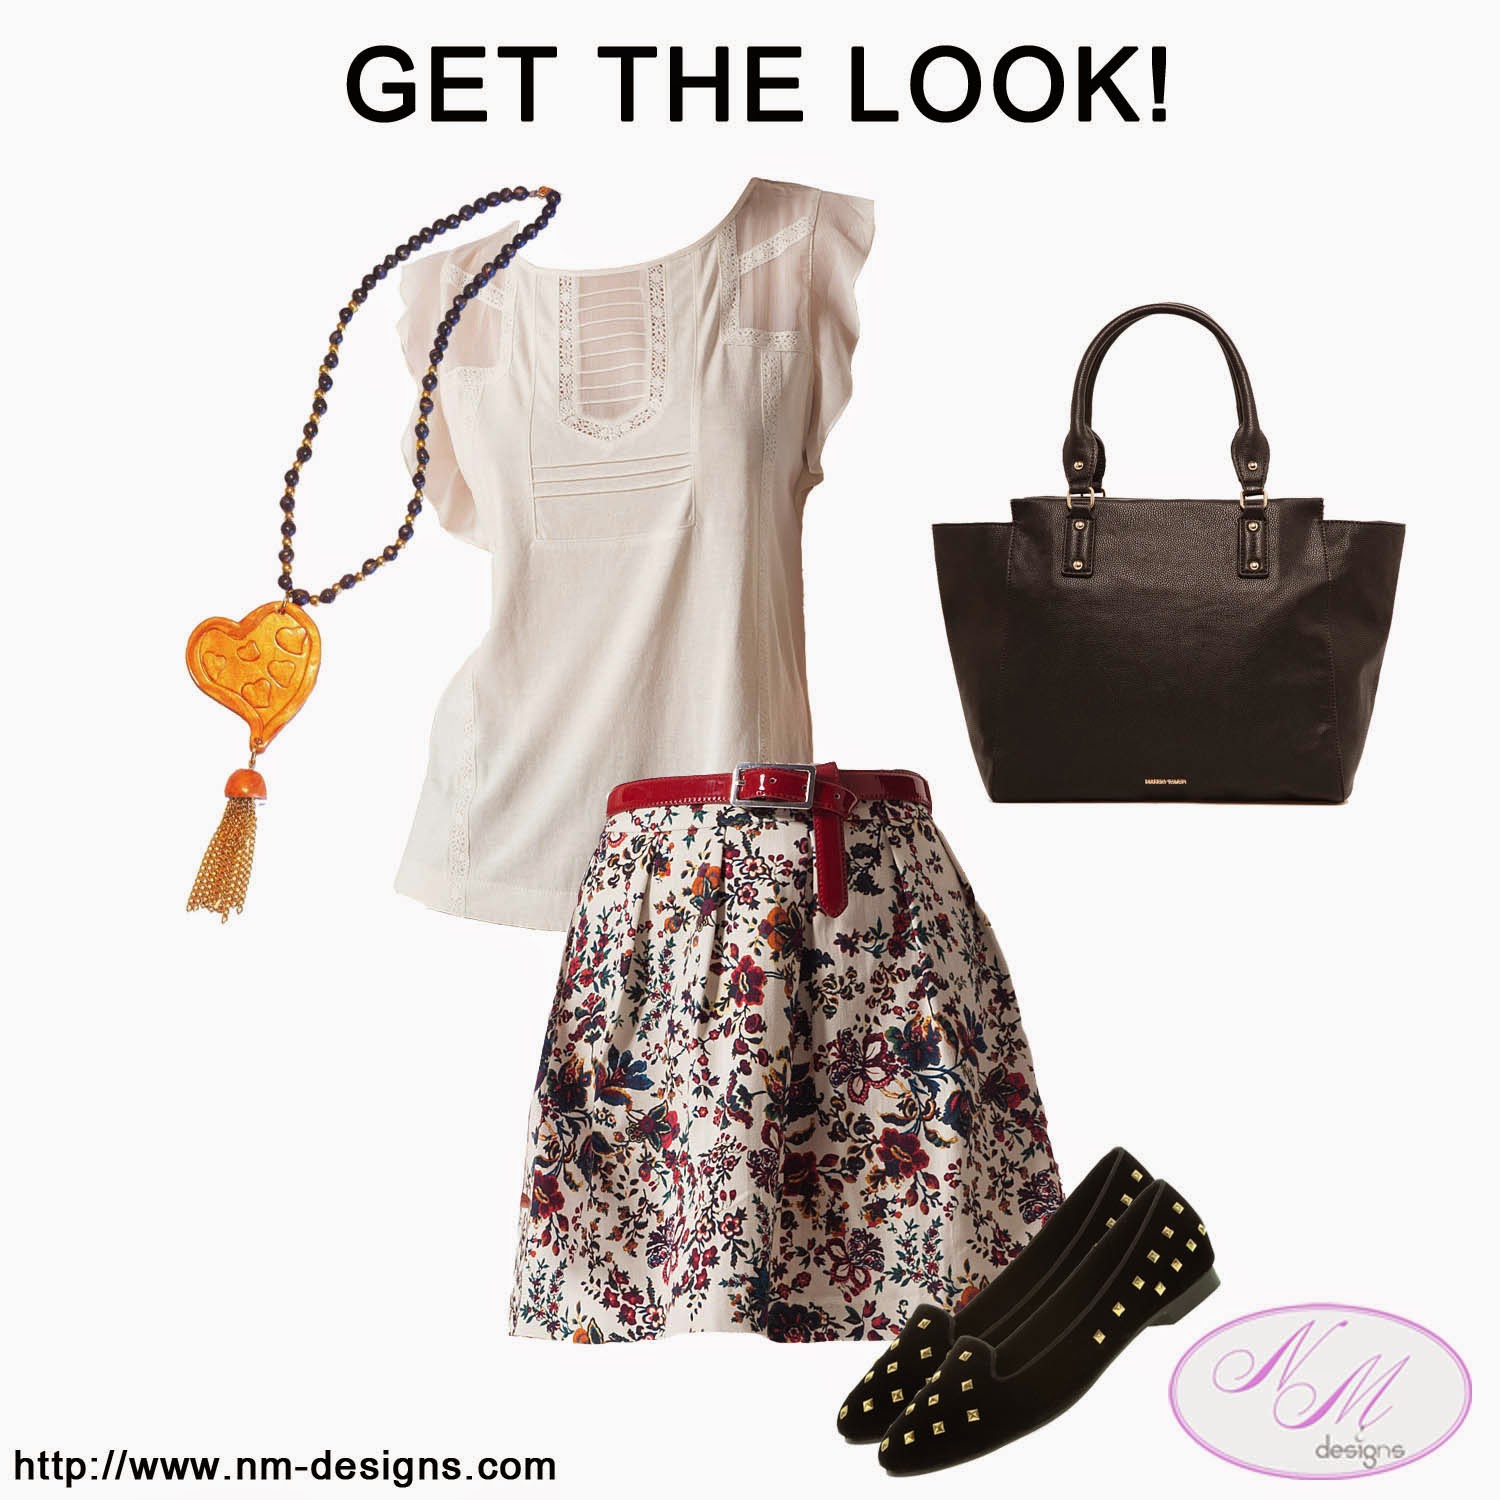 "GET THE LOOK" from September 4, 2014